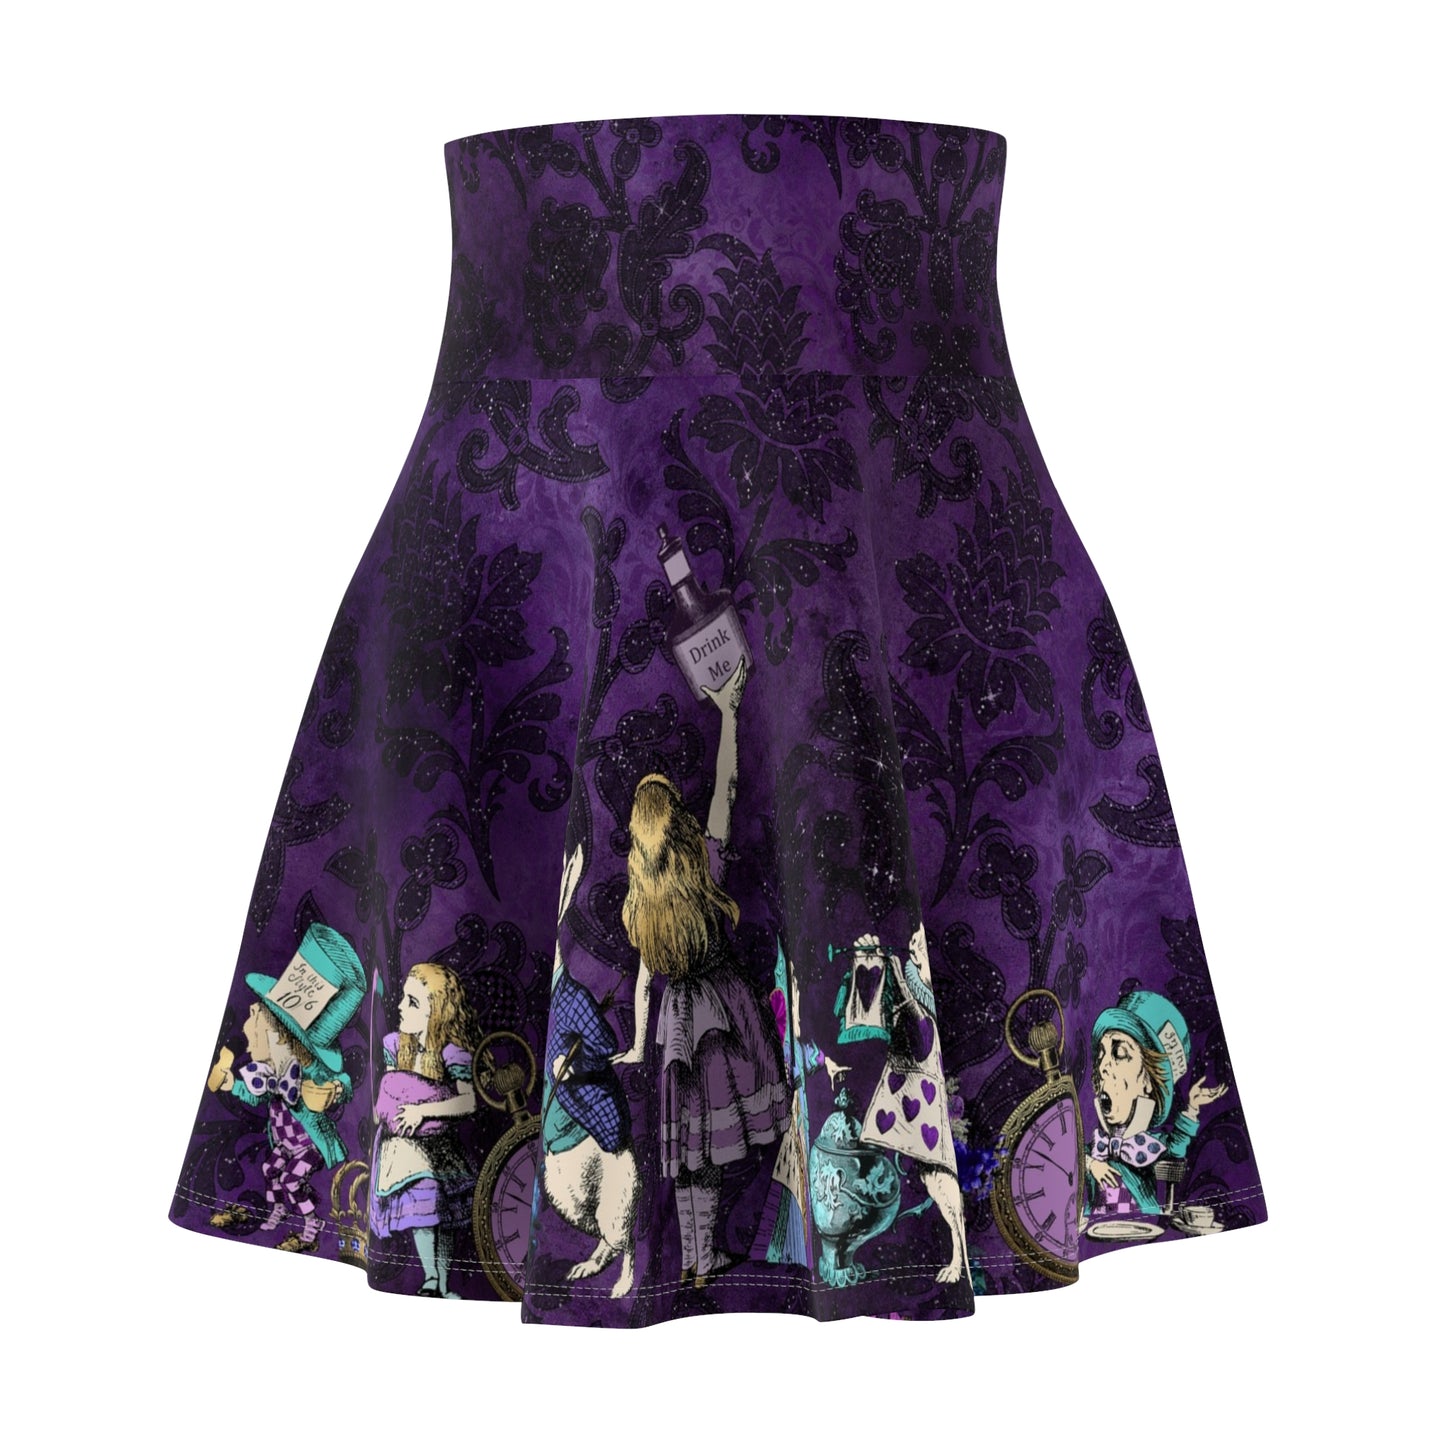 Alice in Wonderland Purple and Turquoise Gothic Skater Skirt